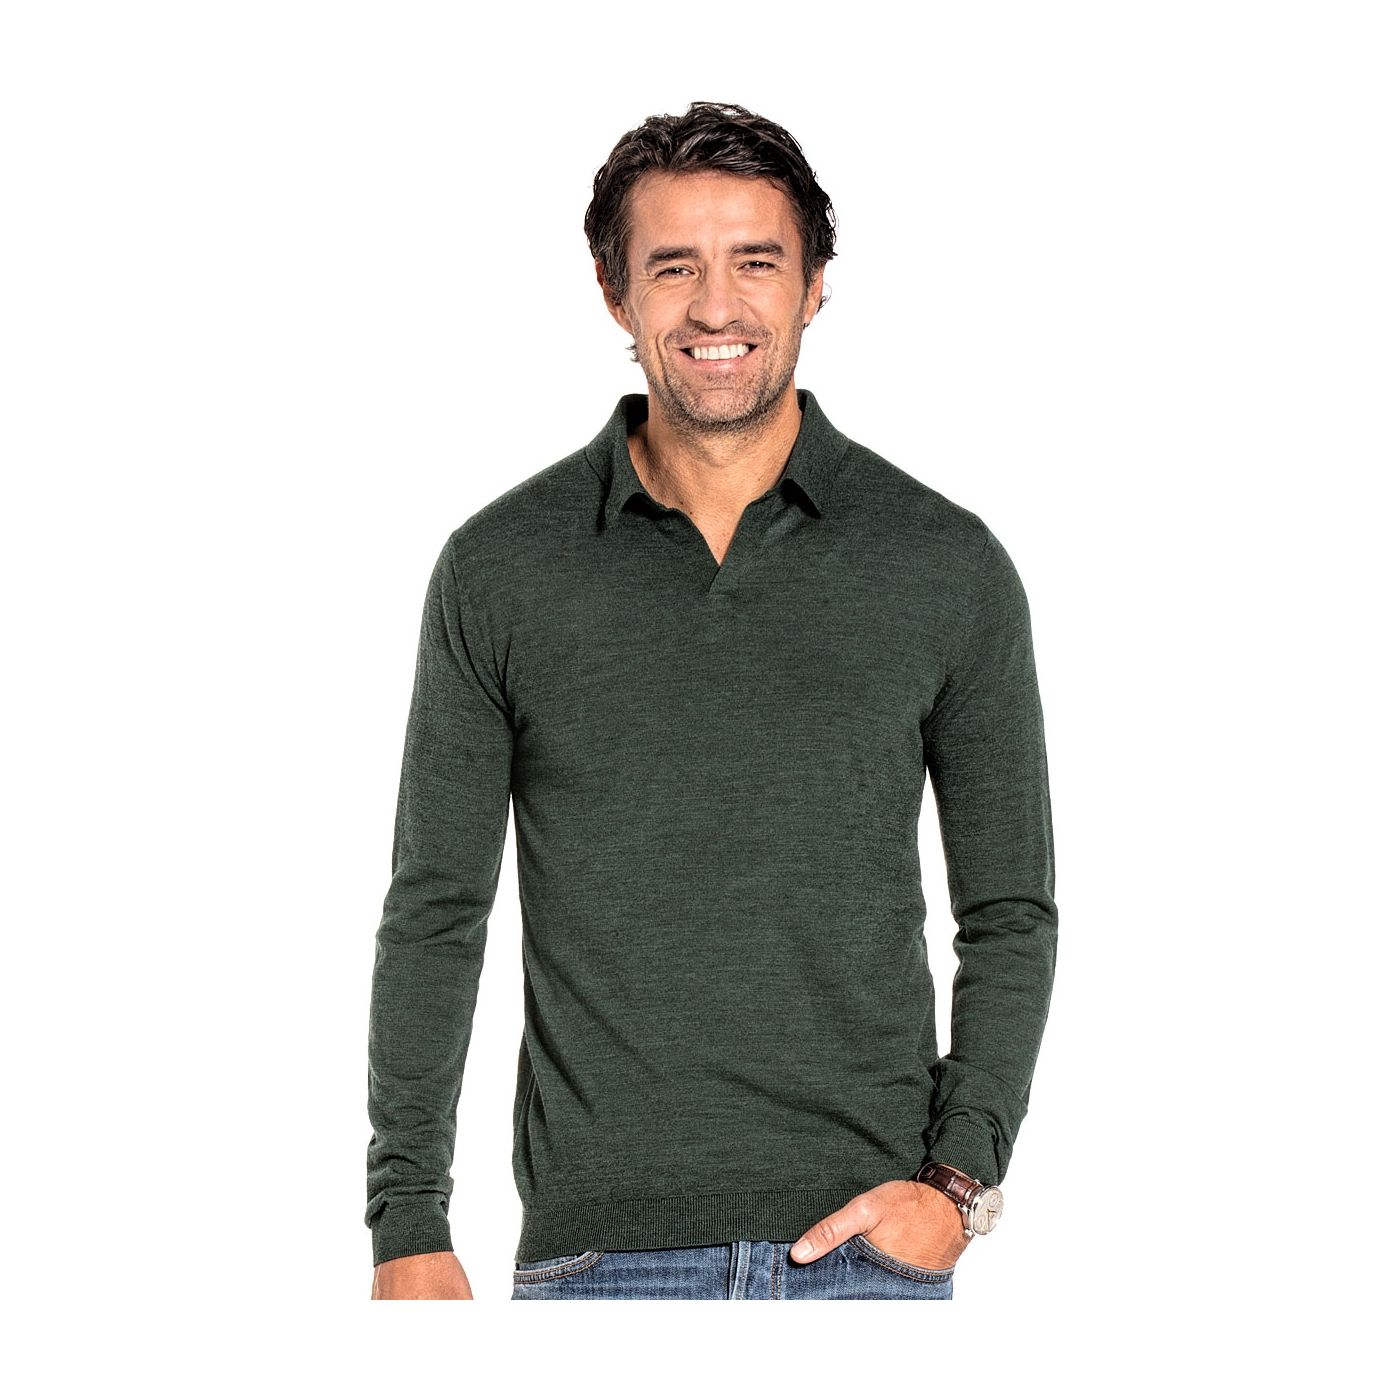 Polo long sleeve without buttons for men made of Merino wool in Dark green